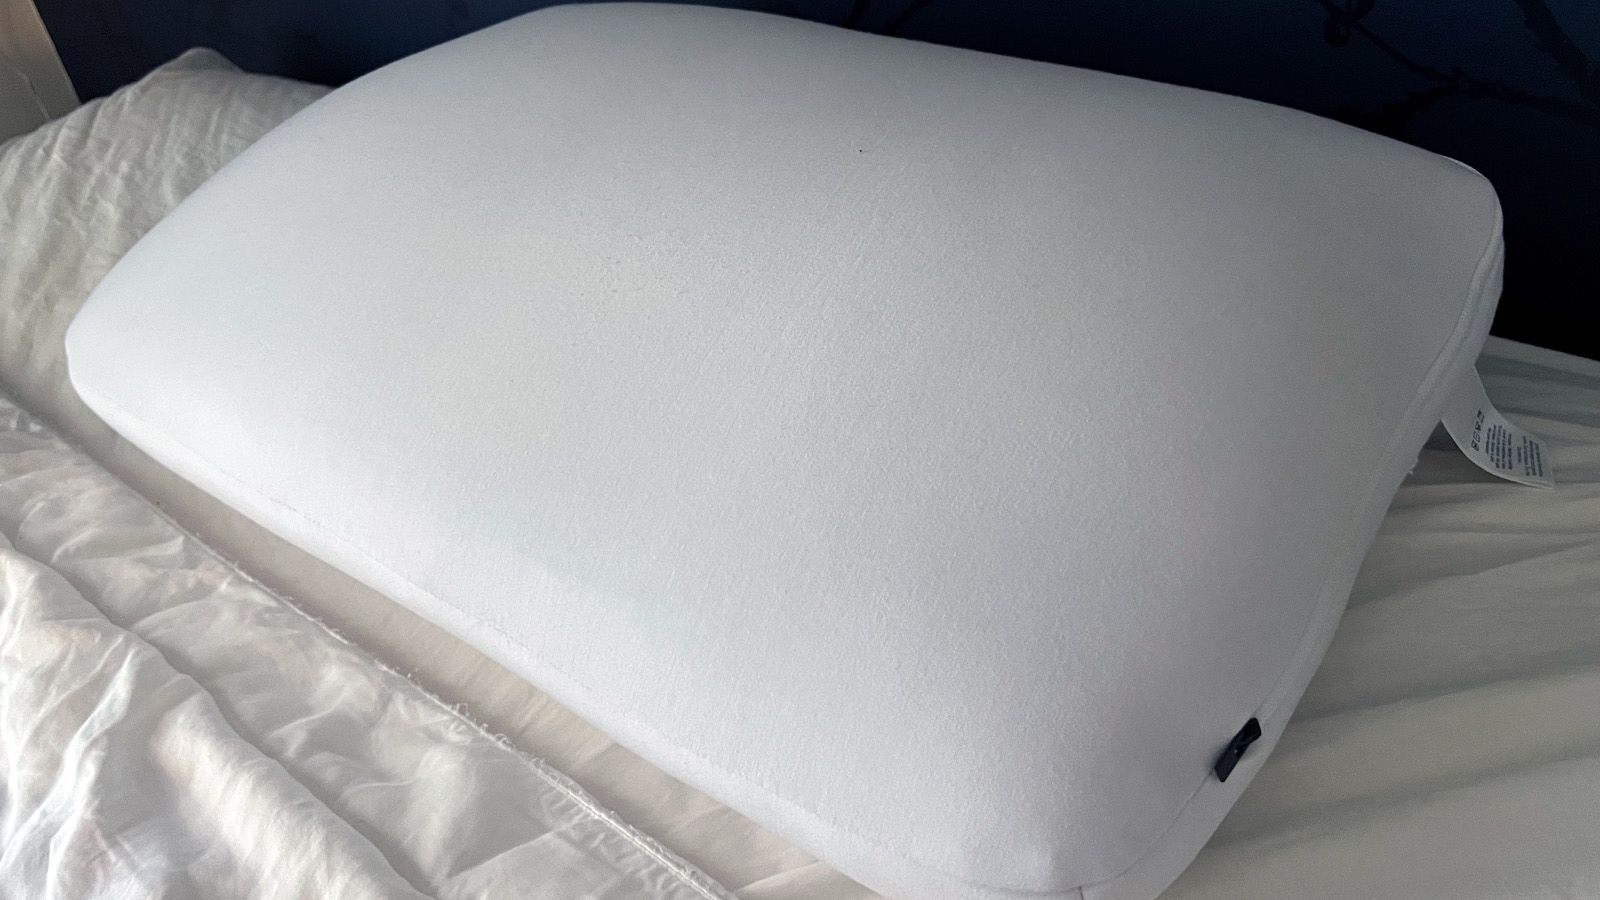 The Stomach Sleeper's Pillow